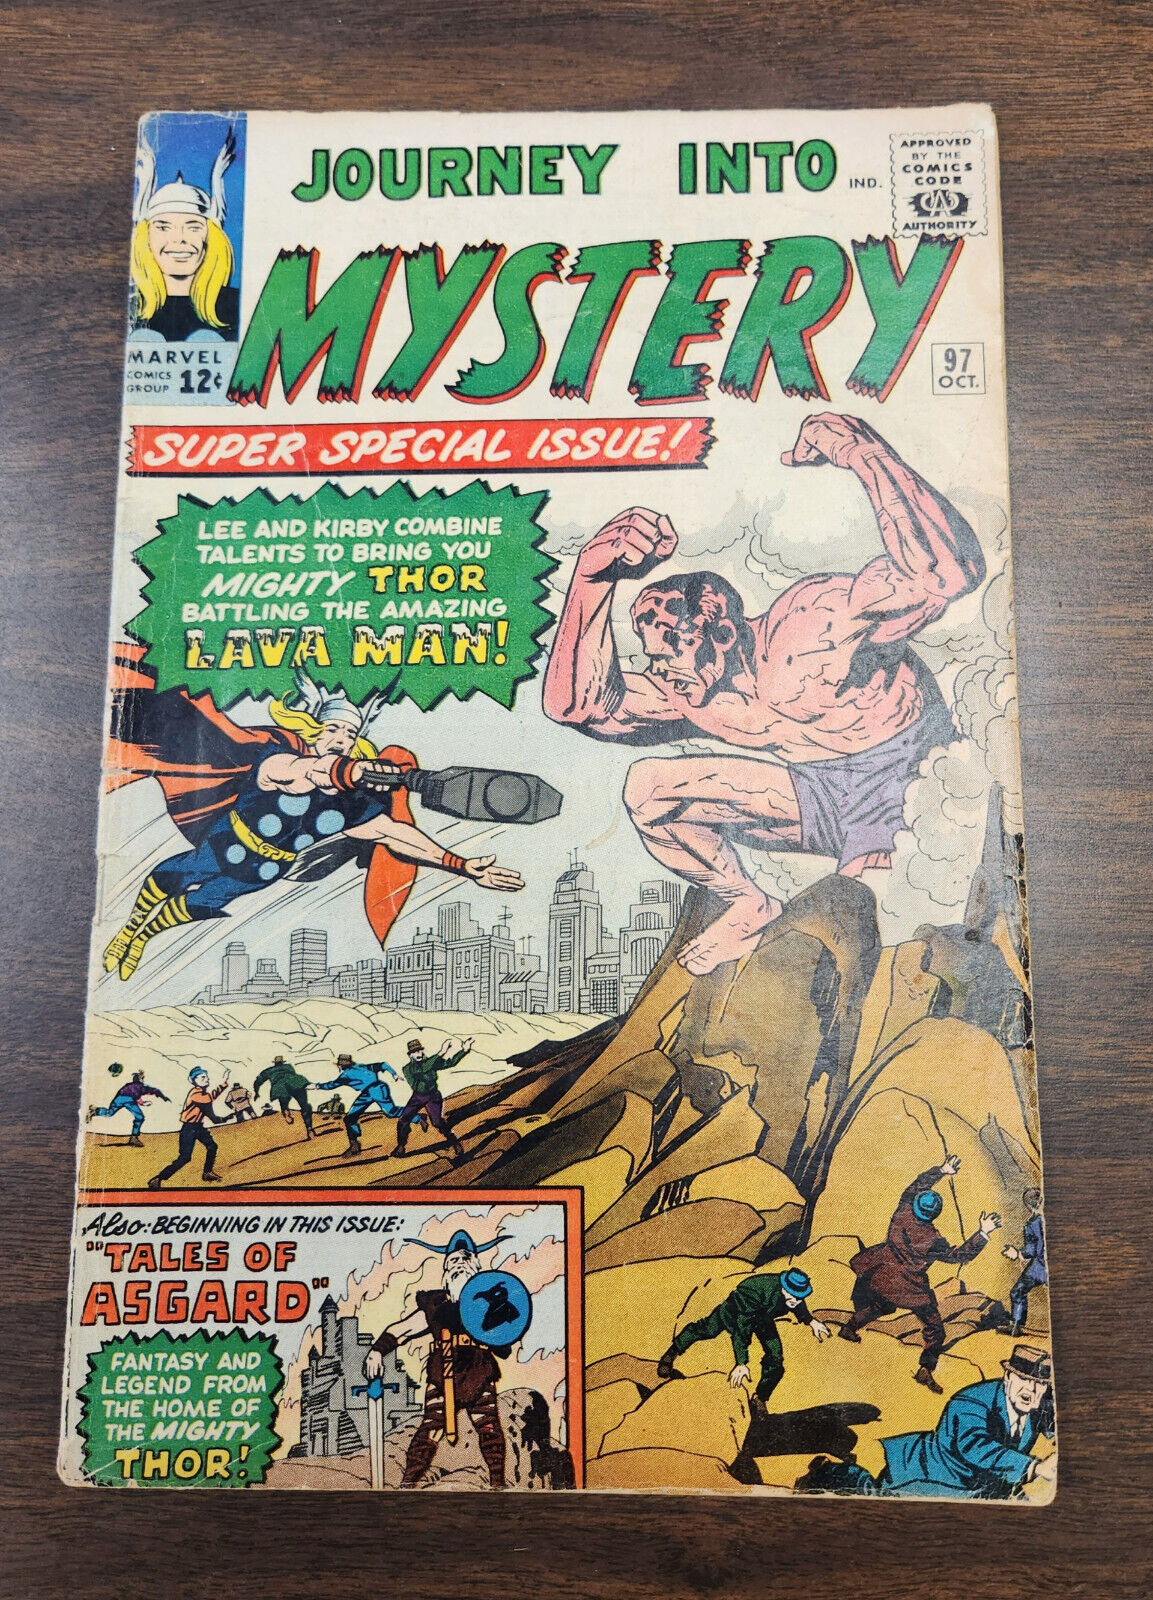 JOURNEY INTO MYSTERY #97 (1963) - 1ST APPEARANCE OF LAVA MAN